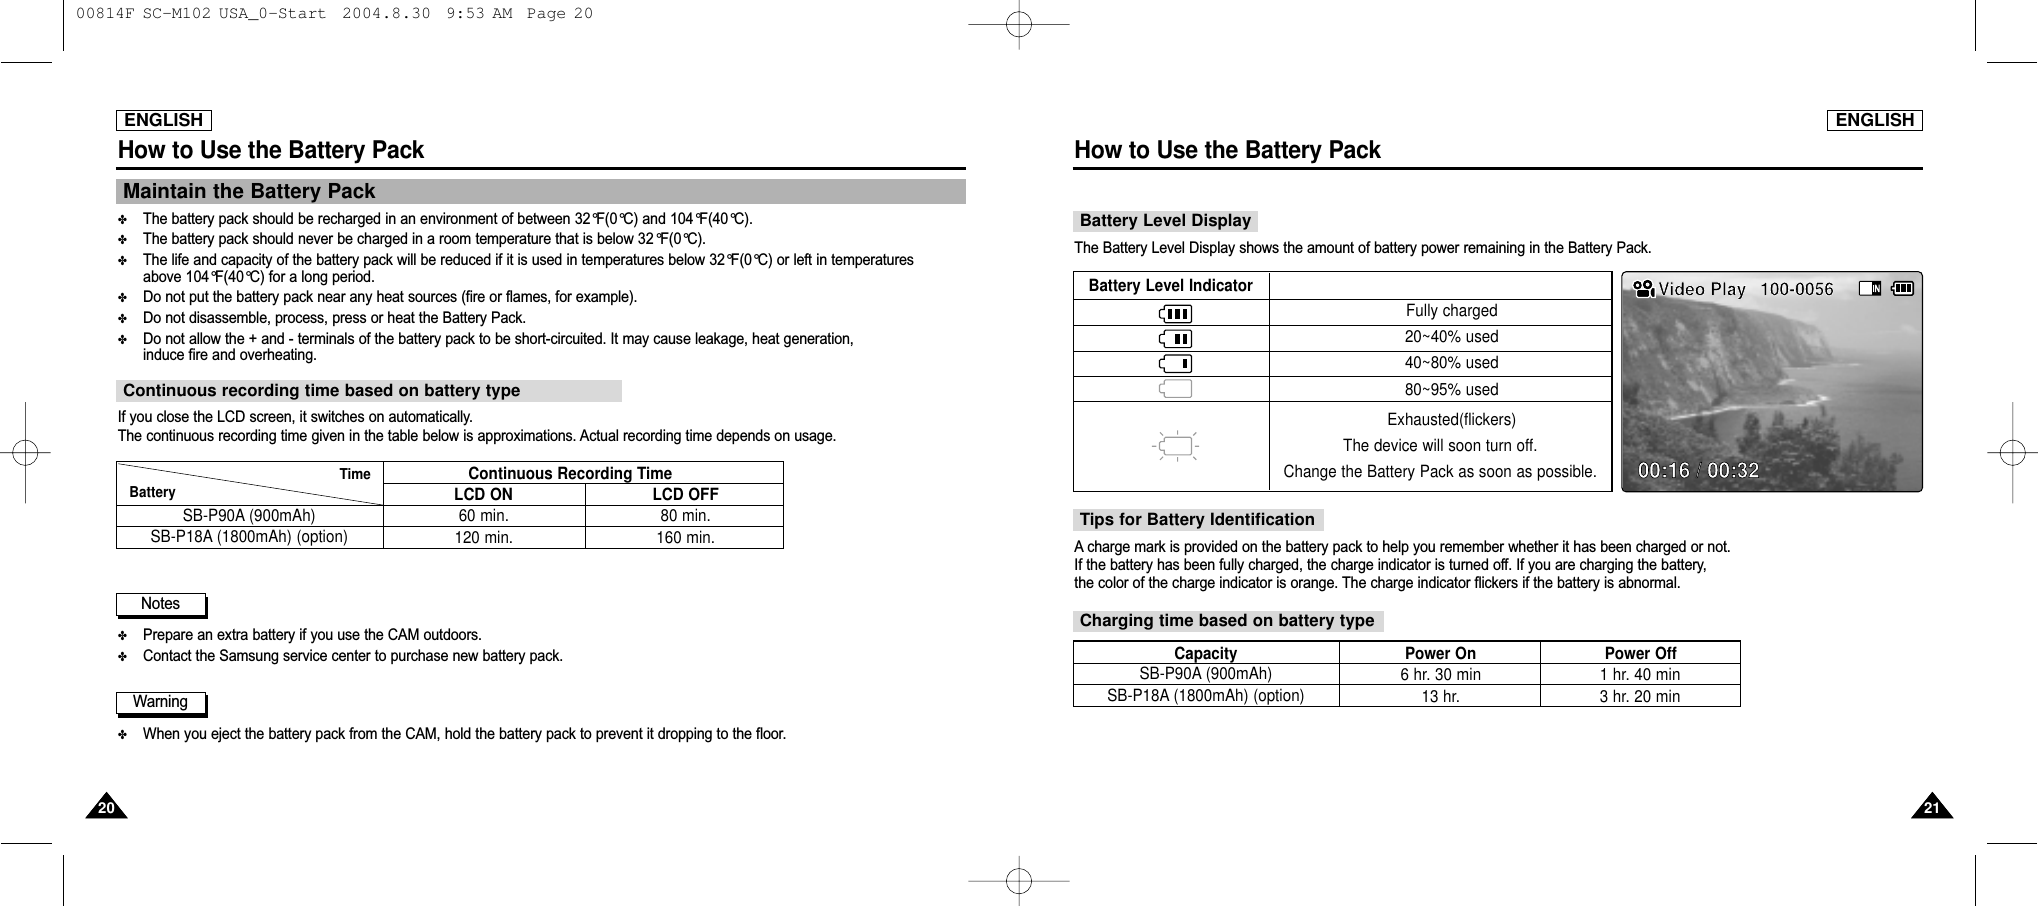 ENGLISHHow to Use the Battery Pack2121ENGLISHHow to Use the Battery Pack2020Maintain the Battery Pack✤The battery pack should be recharged in an environment of between 32°F(0°C) and 104°F(40°C).✤The battery pack should never be charged in a room temperature that is below 32°F(0°C).✤The life and capacity of the battery pack will be reduced if it is used in temperatures below 32°F(0°C) or left in temperatures above 104°F(40°C) for a long period. ✤Do not put the battery pack near any heat sources (fire or flames, for example).✤Do not disassemble, process, press or heat the Battery Pack.✤Do not allow the + and - terminals of the battery pack to be short-circuited. It may cause leakage, heat generation,induce fire and overheating.✤Prepare an extra battery if you use the CAM outdoors.✤Contact the Samsung service center to purchase new battery pack.✤When you eject the battery pack from the CAM, hold the battery pack to prevent it dropping to the floor.If you close the LCD screen, it switches on automatically.The continuous recording time given in the table below is approximations. Actual recording time depends on usage.Continuous recording time based on battery typeContinuous Recording TimeLCD ON LCD OFFSB-P90A (900mAh) SB-P18A (1800mAh) (option)60 min.120 min.80 min.160 min.Battery  TimeWarningNotesBattery Level DisplayThe Battery Level Display shows the amount of battery power remaining in the Battery Pack.Tips for Battery IdentificationCharging time based on battery typeA charge mark is provided on the battery pack to help you remember whether it has been charged or not.If the battery has been fully charged, the charge indicator is turned off. If you are charging the battery, the color of the charge indicator is orange. The charge indicator flickers if the battery is abnormal.Battery Level IndicatorFully charged20~40% used40~80% used80~95% usedExhausted(flickers)The device will soon turn off. Change the Battery Pack as soon as possible.Video Play 100-005600:16 / 00:32SB-P90A (900mAh) SB-P18A (1800mAh) (option)6 hr. 30 min13 hr.1 hr. 40 min3 hr. 20 minCapacity Power On Power Off 00814F SC-M102 USA_0-Start  2004.8.30  9:53 AM  Page 20